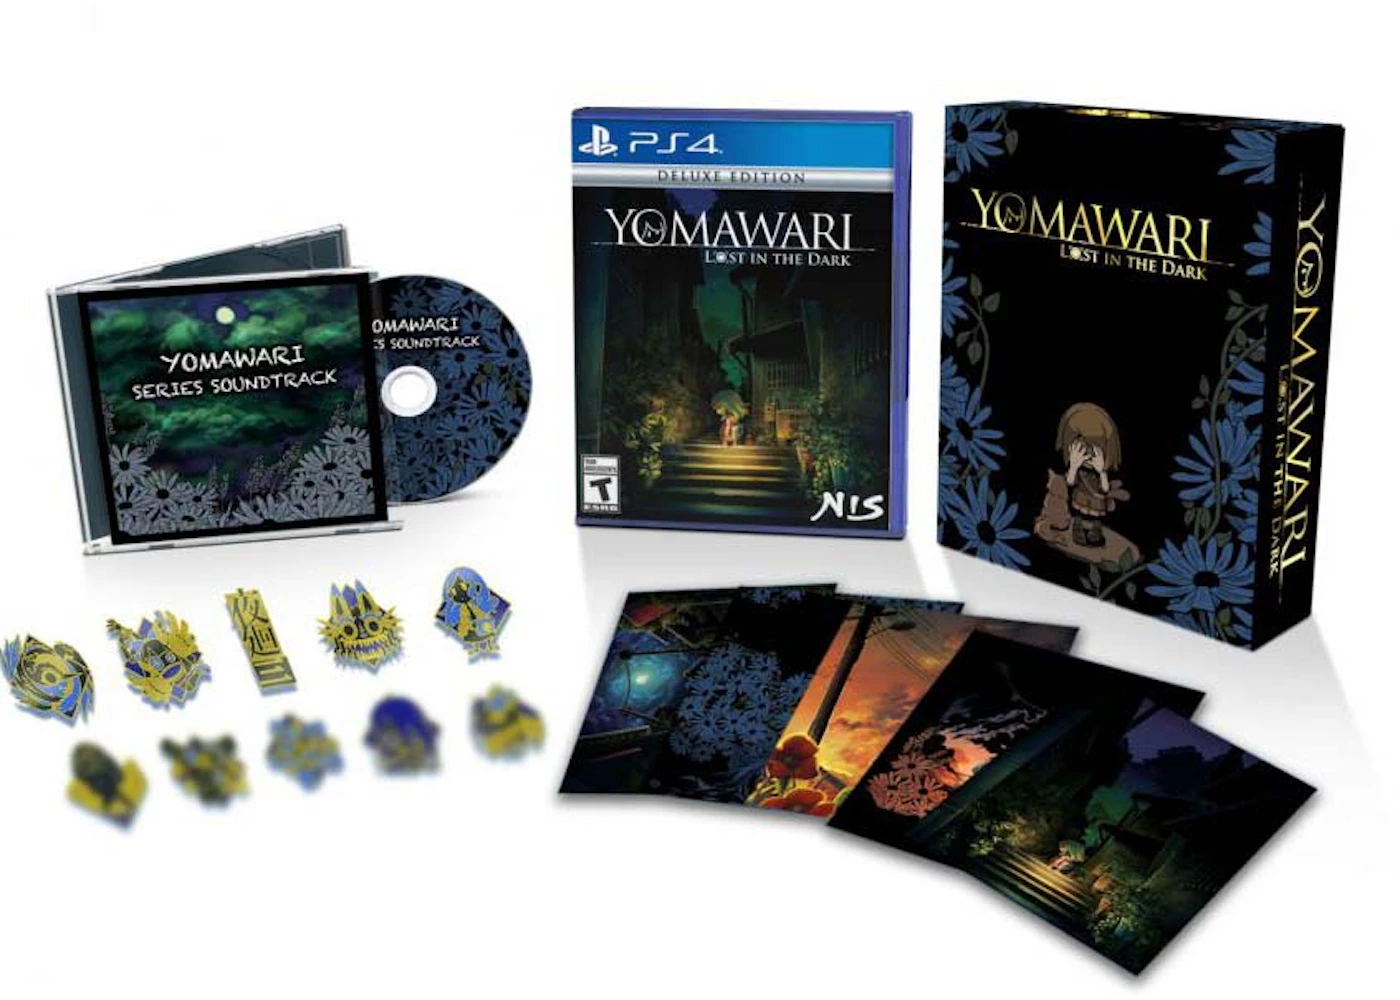 NIS PS4 Yomawari: in Dark Limited Edition Video Game - US